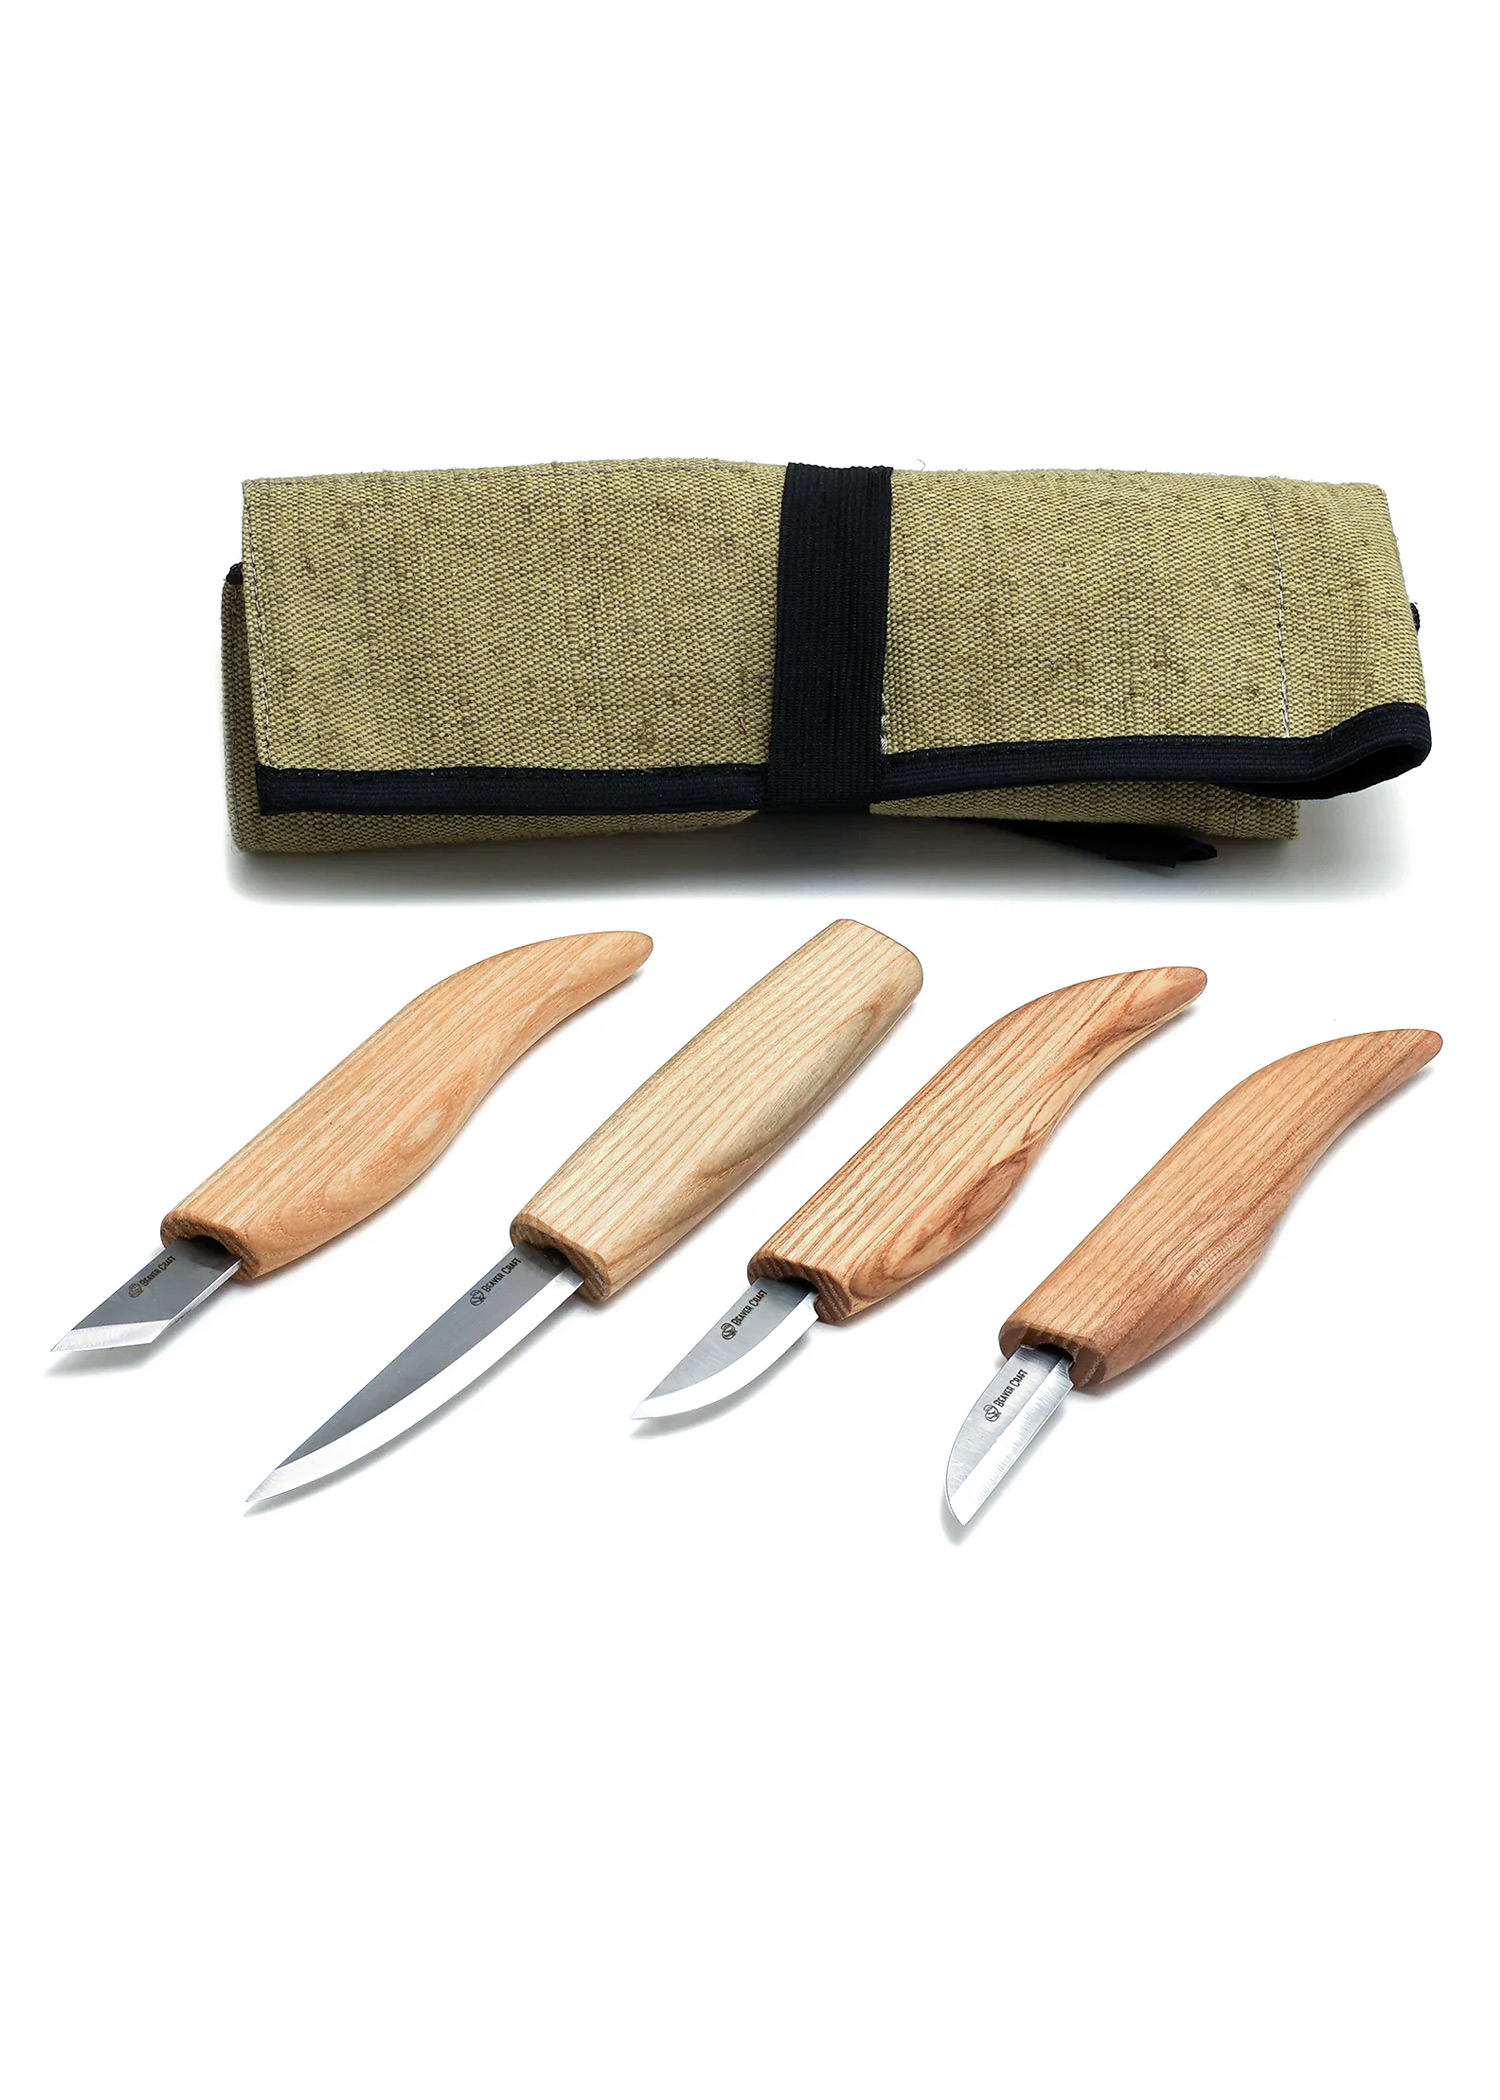 bc-s07_beavercraft_basic_set_4_messer_rolle_carving_knives_couteau